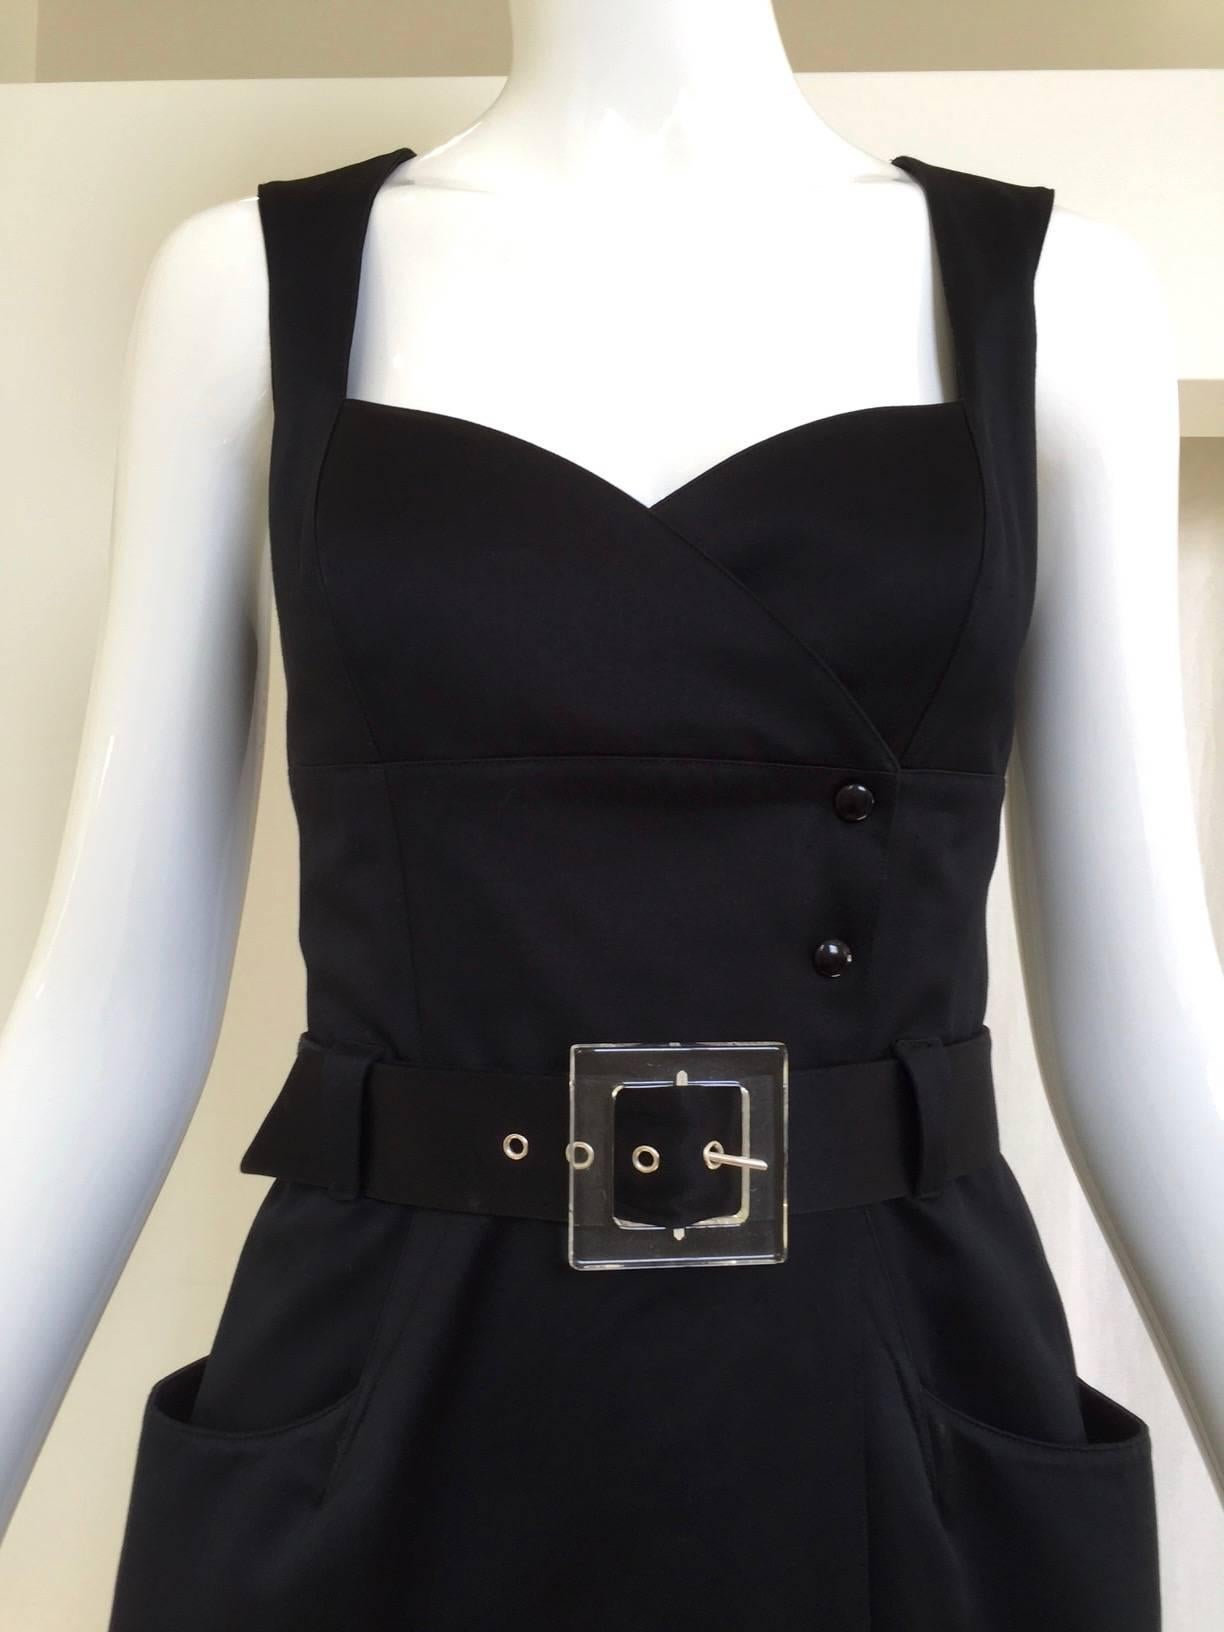 Thierry Mugler Vintage Black Cotton Wrap Dress with Acrylic Belt, 1990s In Excellent Condition For Sale In Beverly Hills, CA